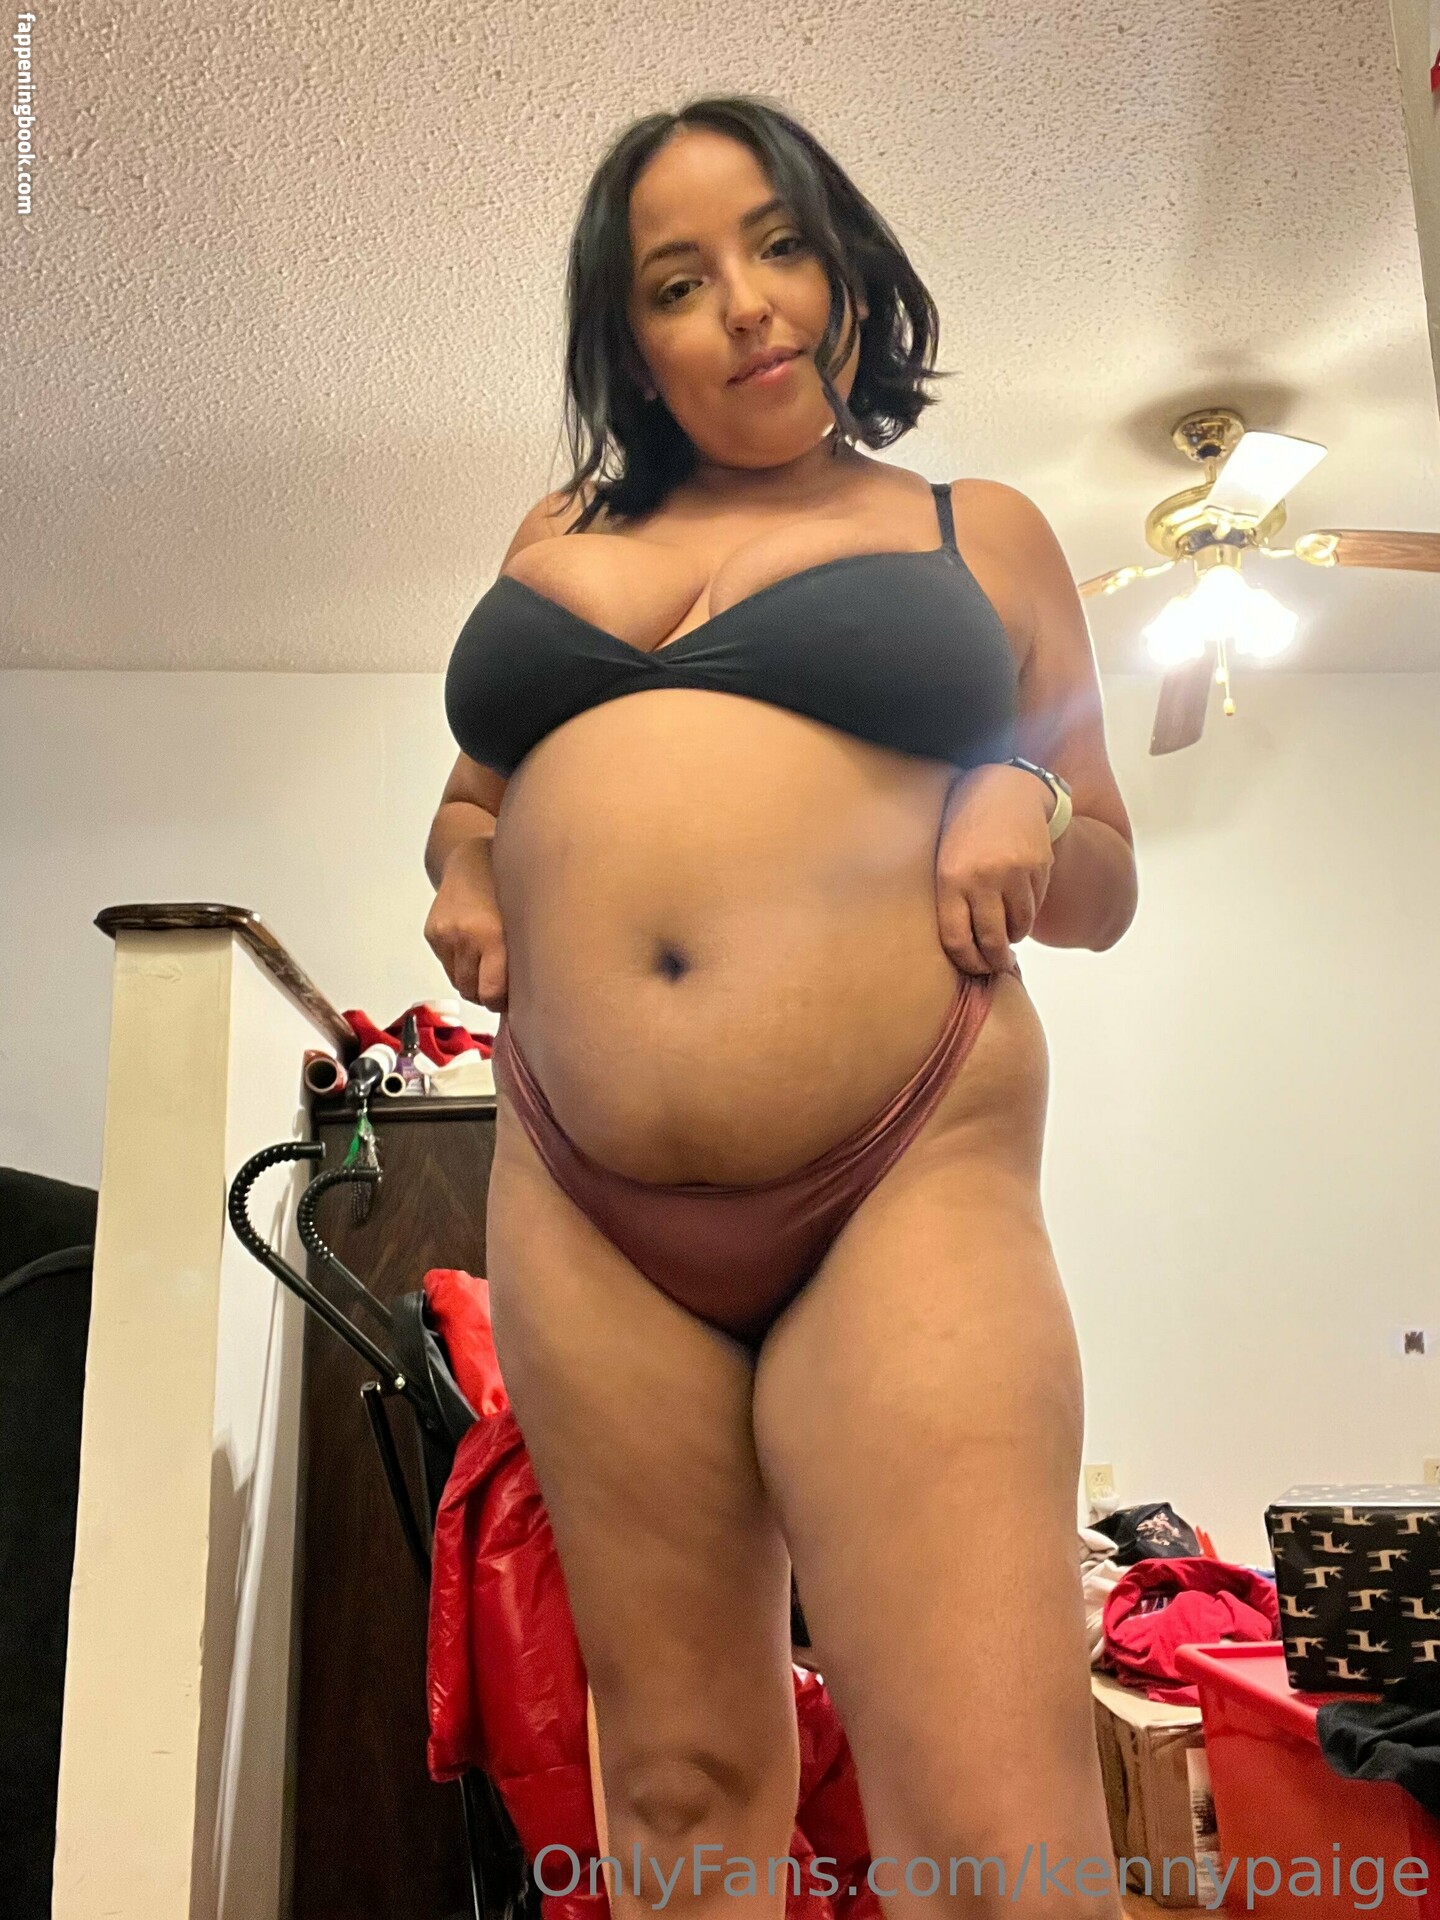 kennypaige Nude OnlyFans Leaks